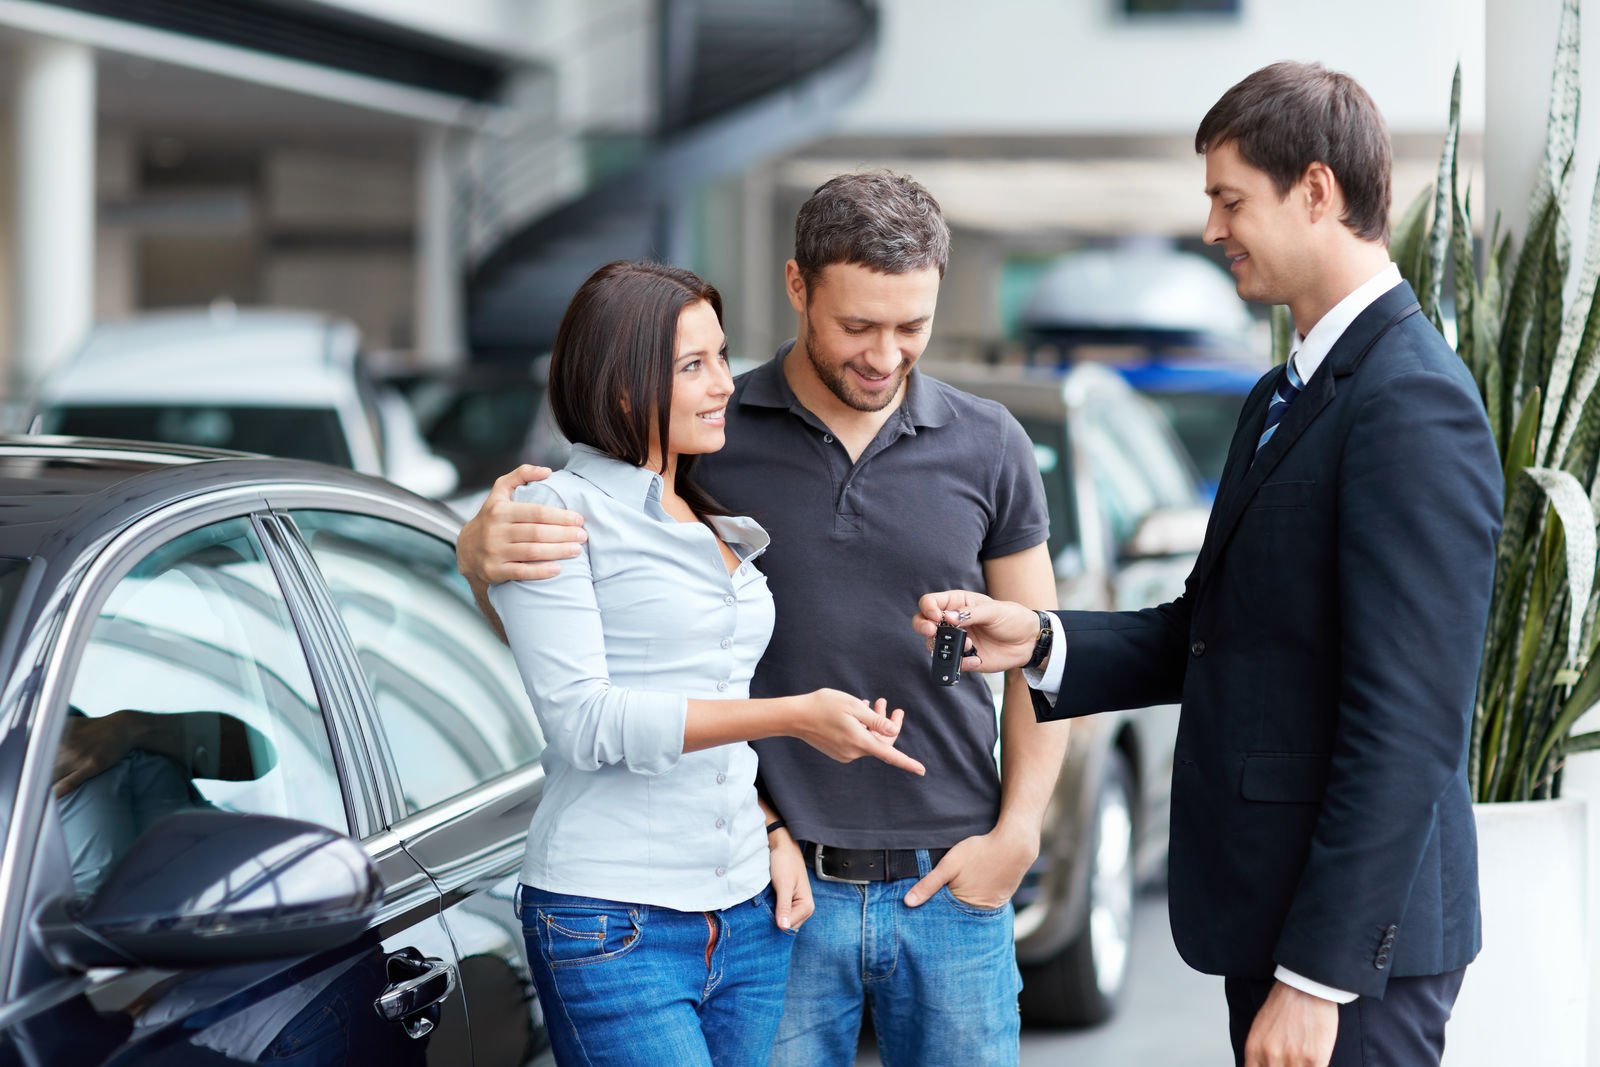 Do you need proof of insurance to rent a car?